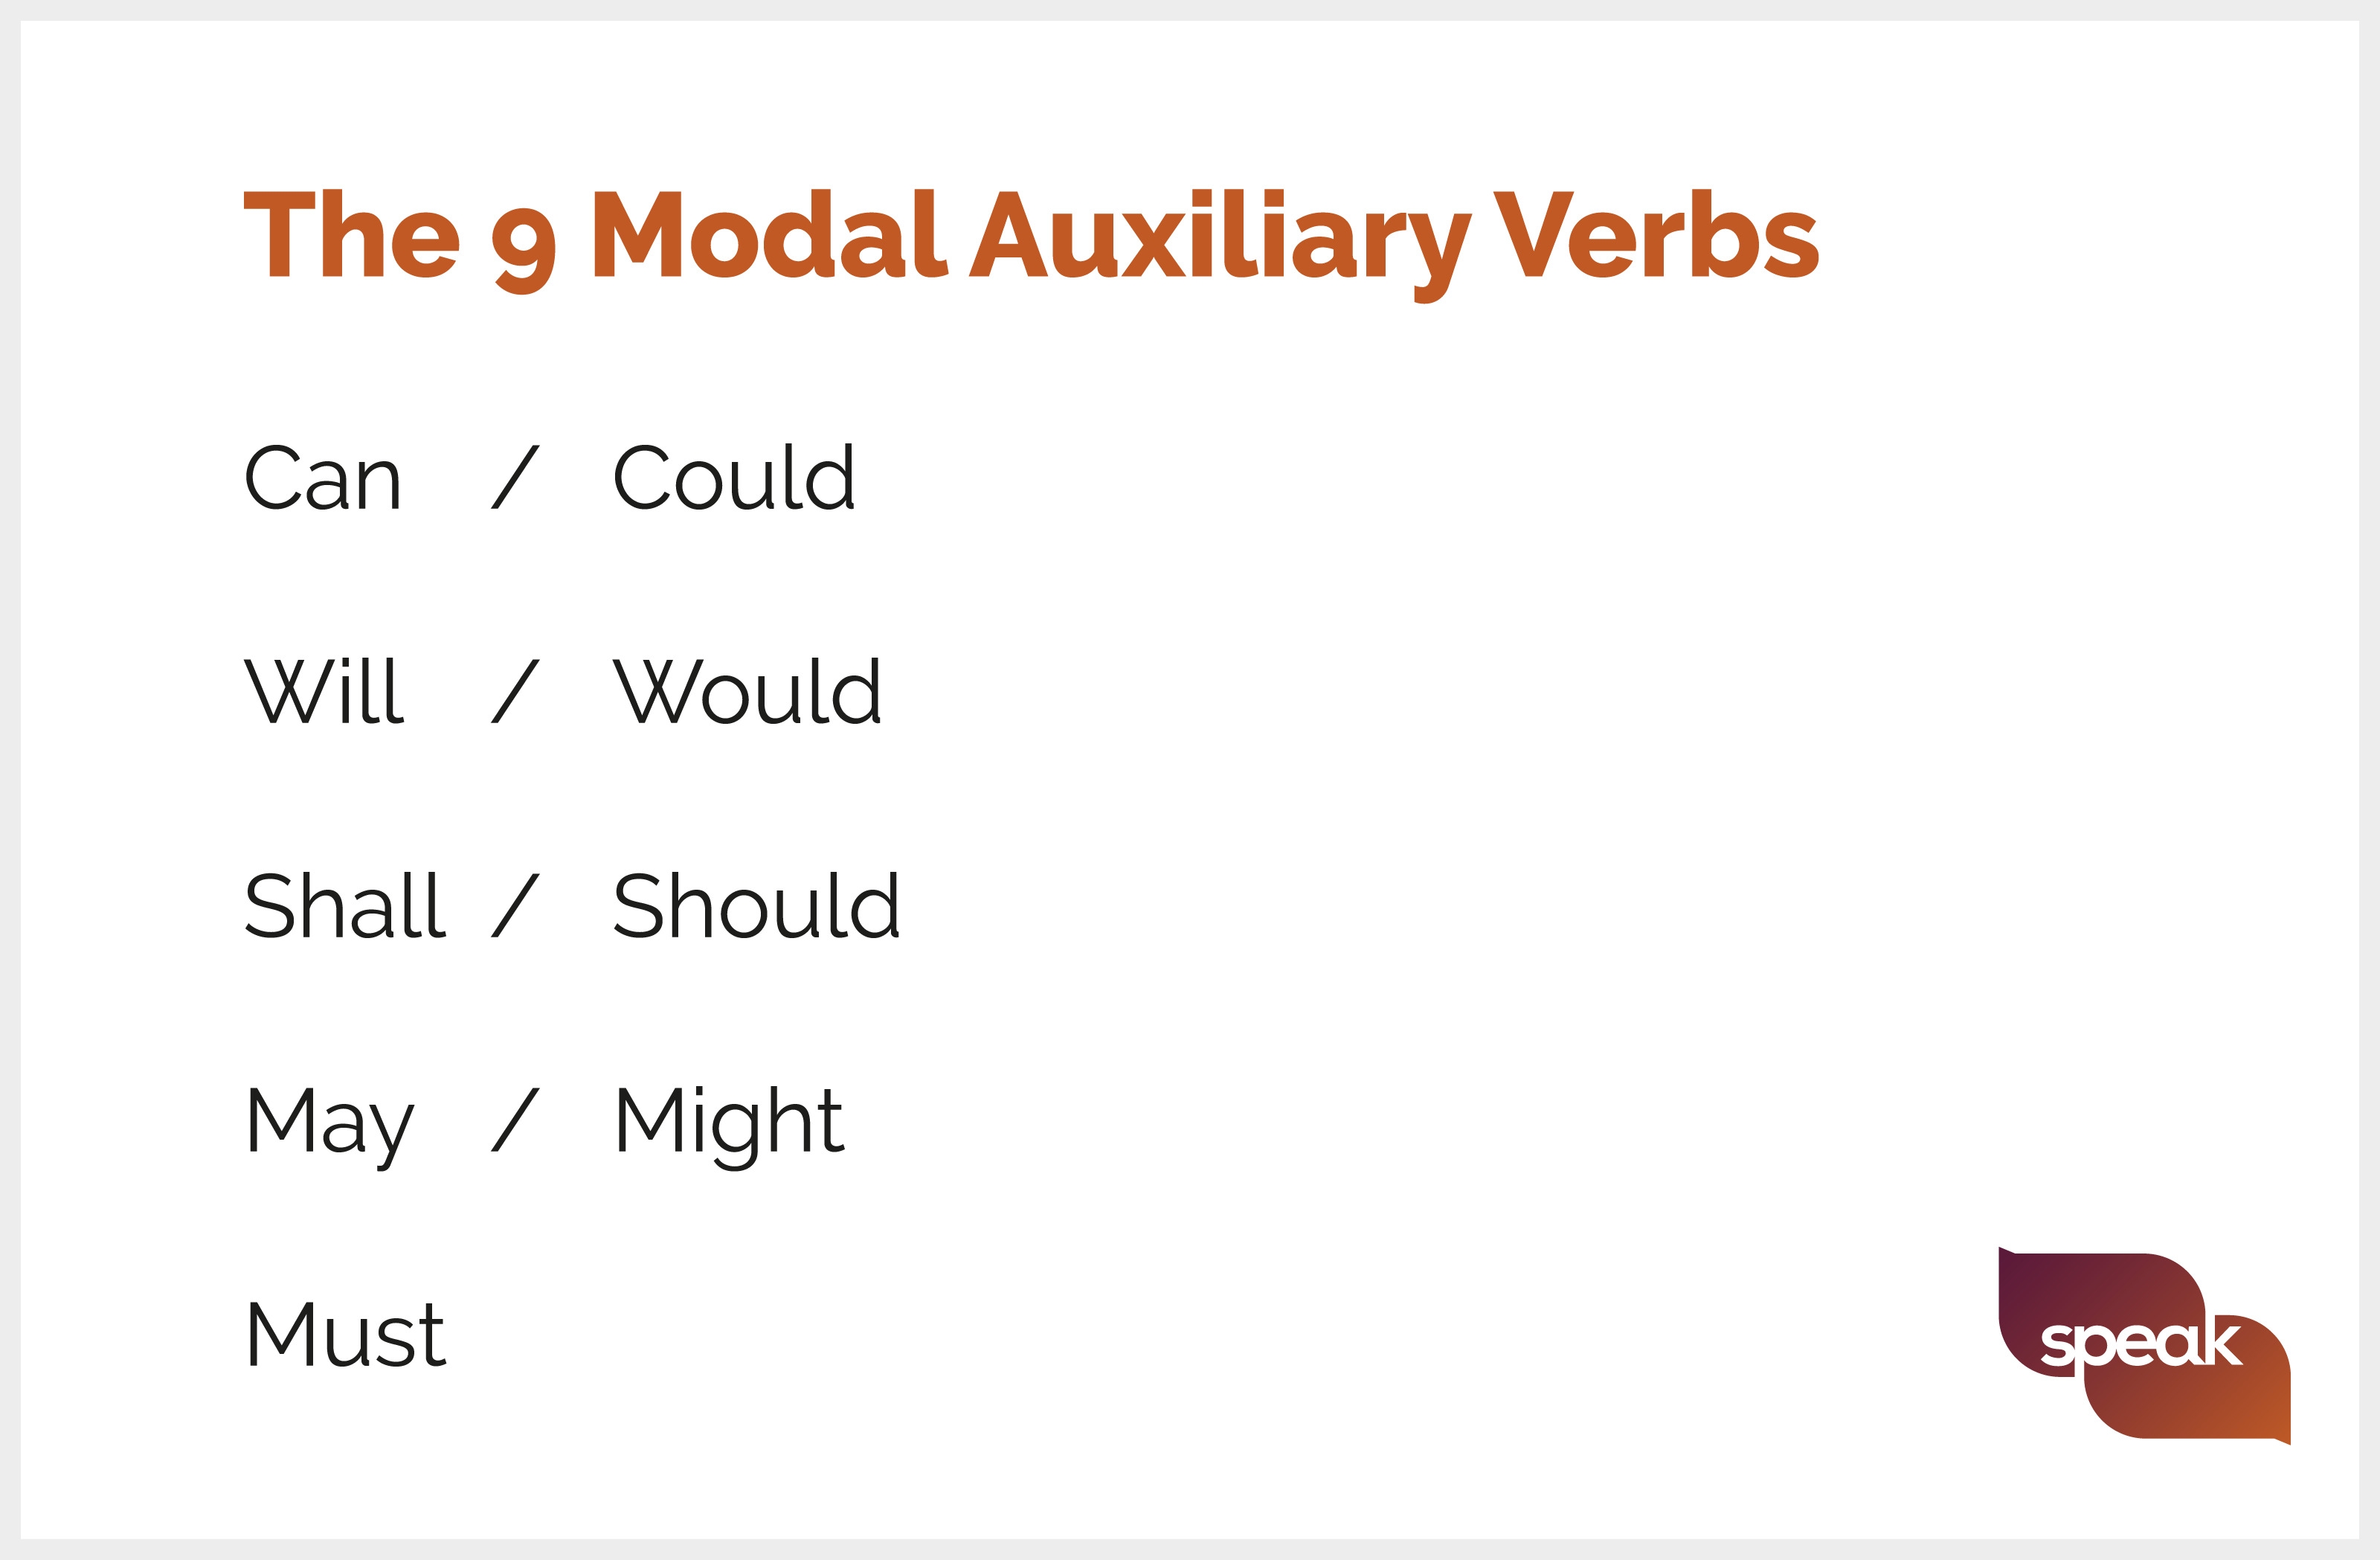 The 9 modal auxiliary verbs in English